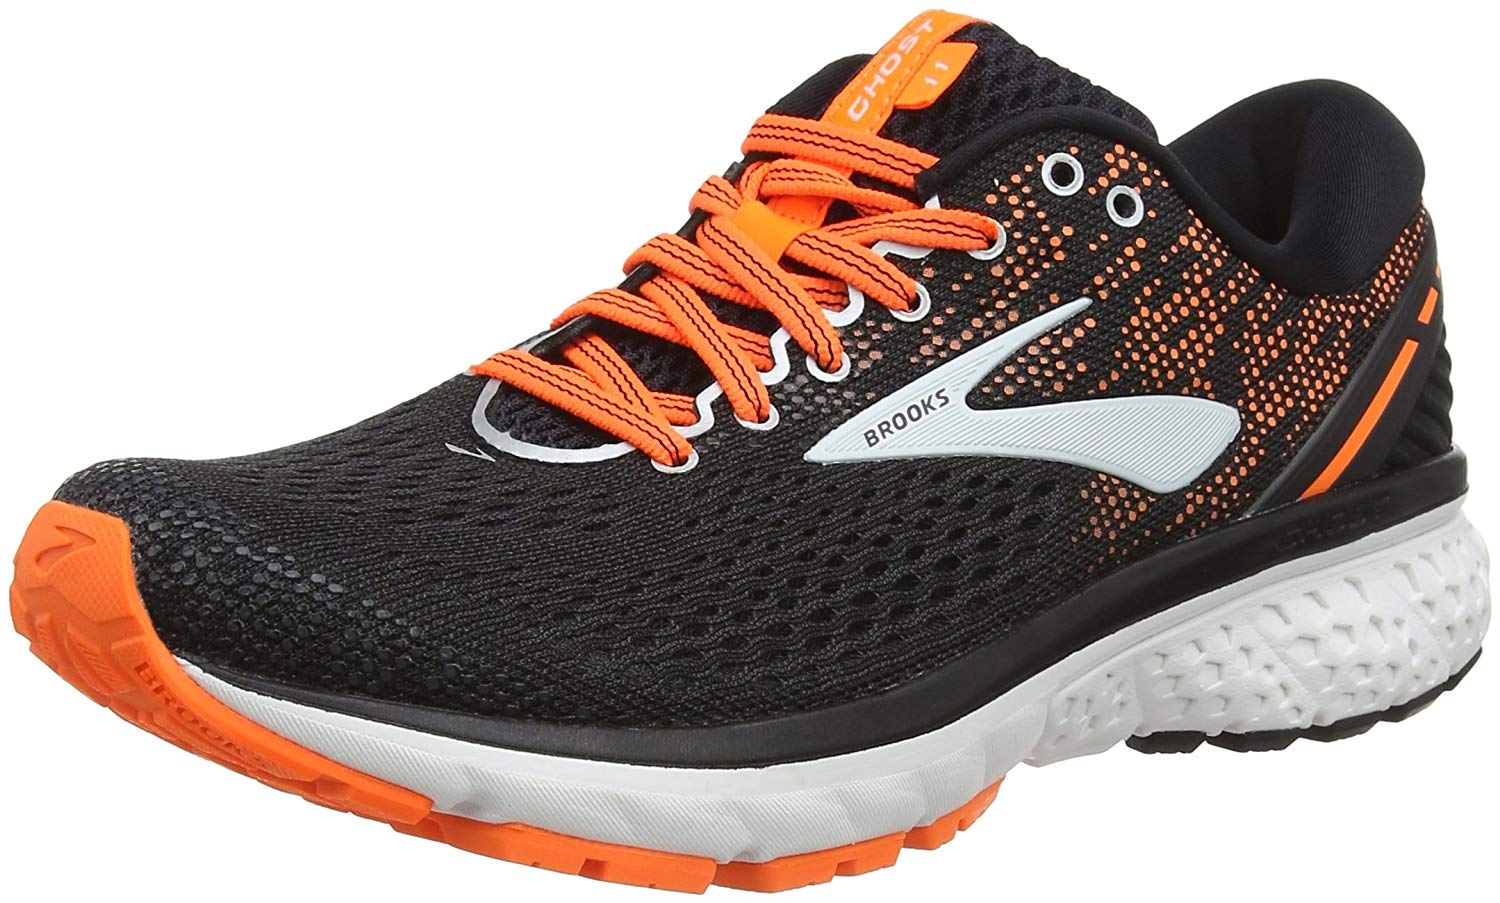 Brooks Ghost 11 Reviewed for 